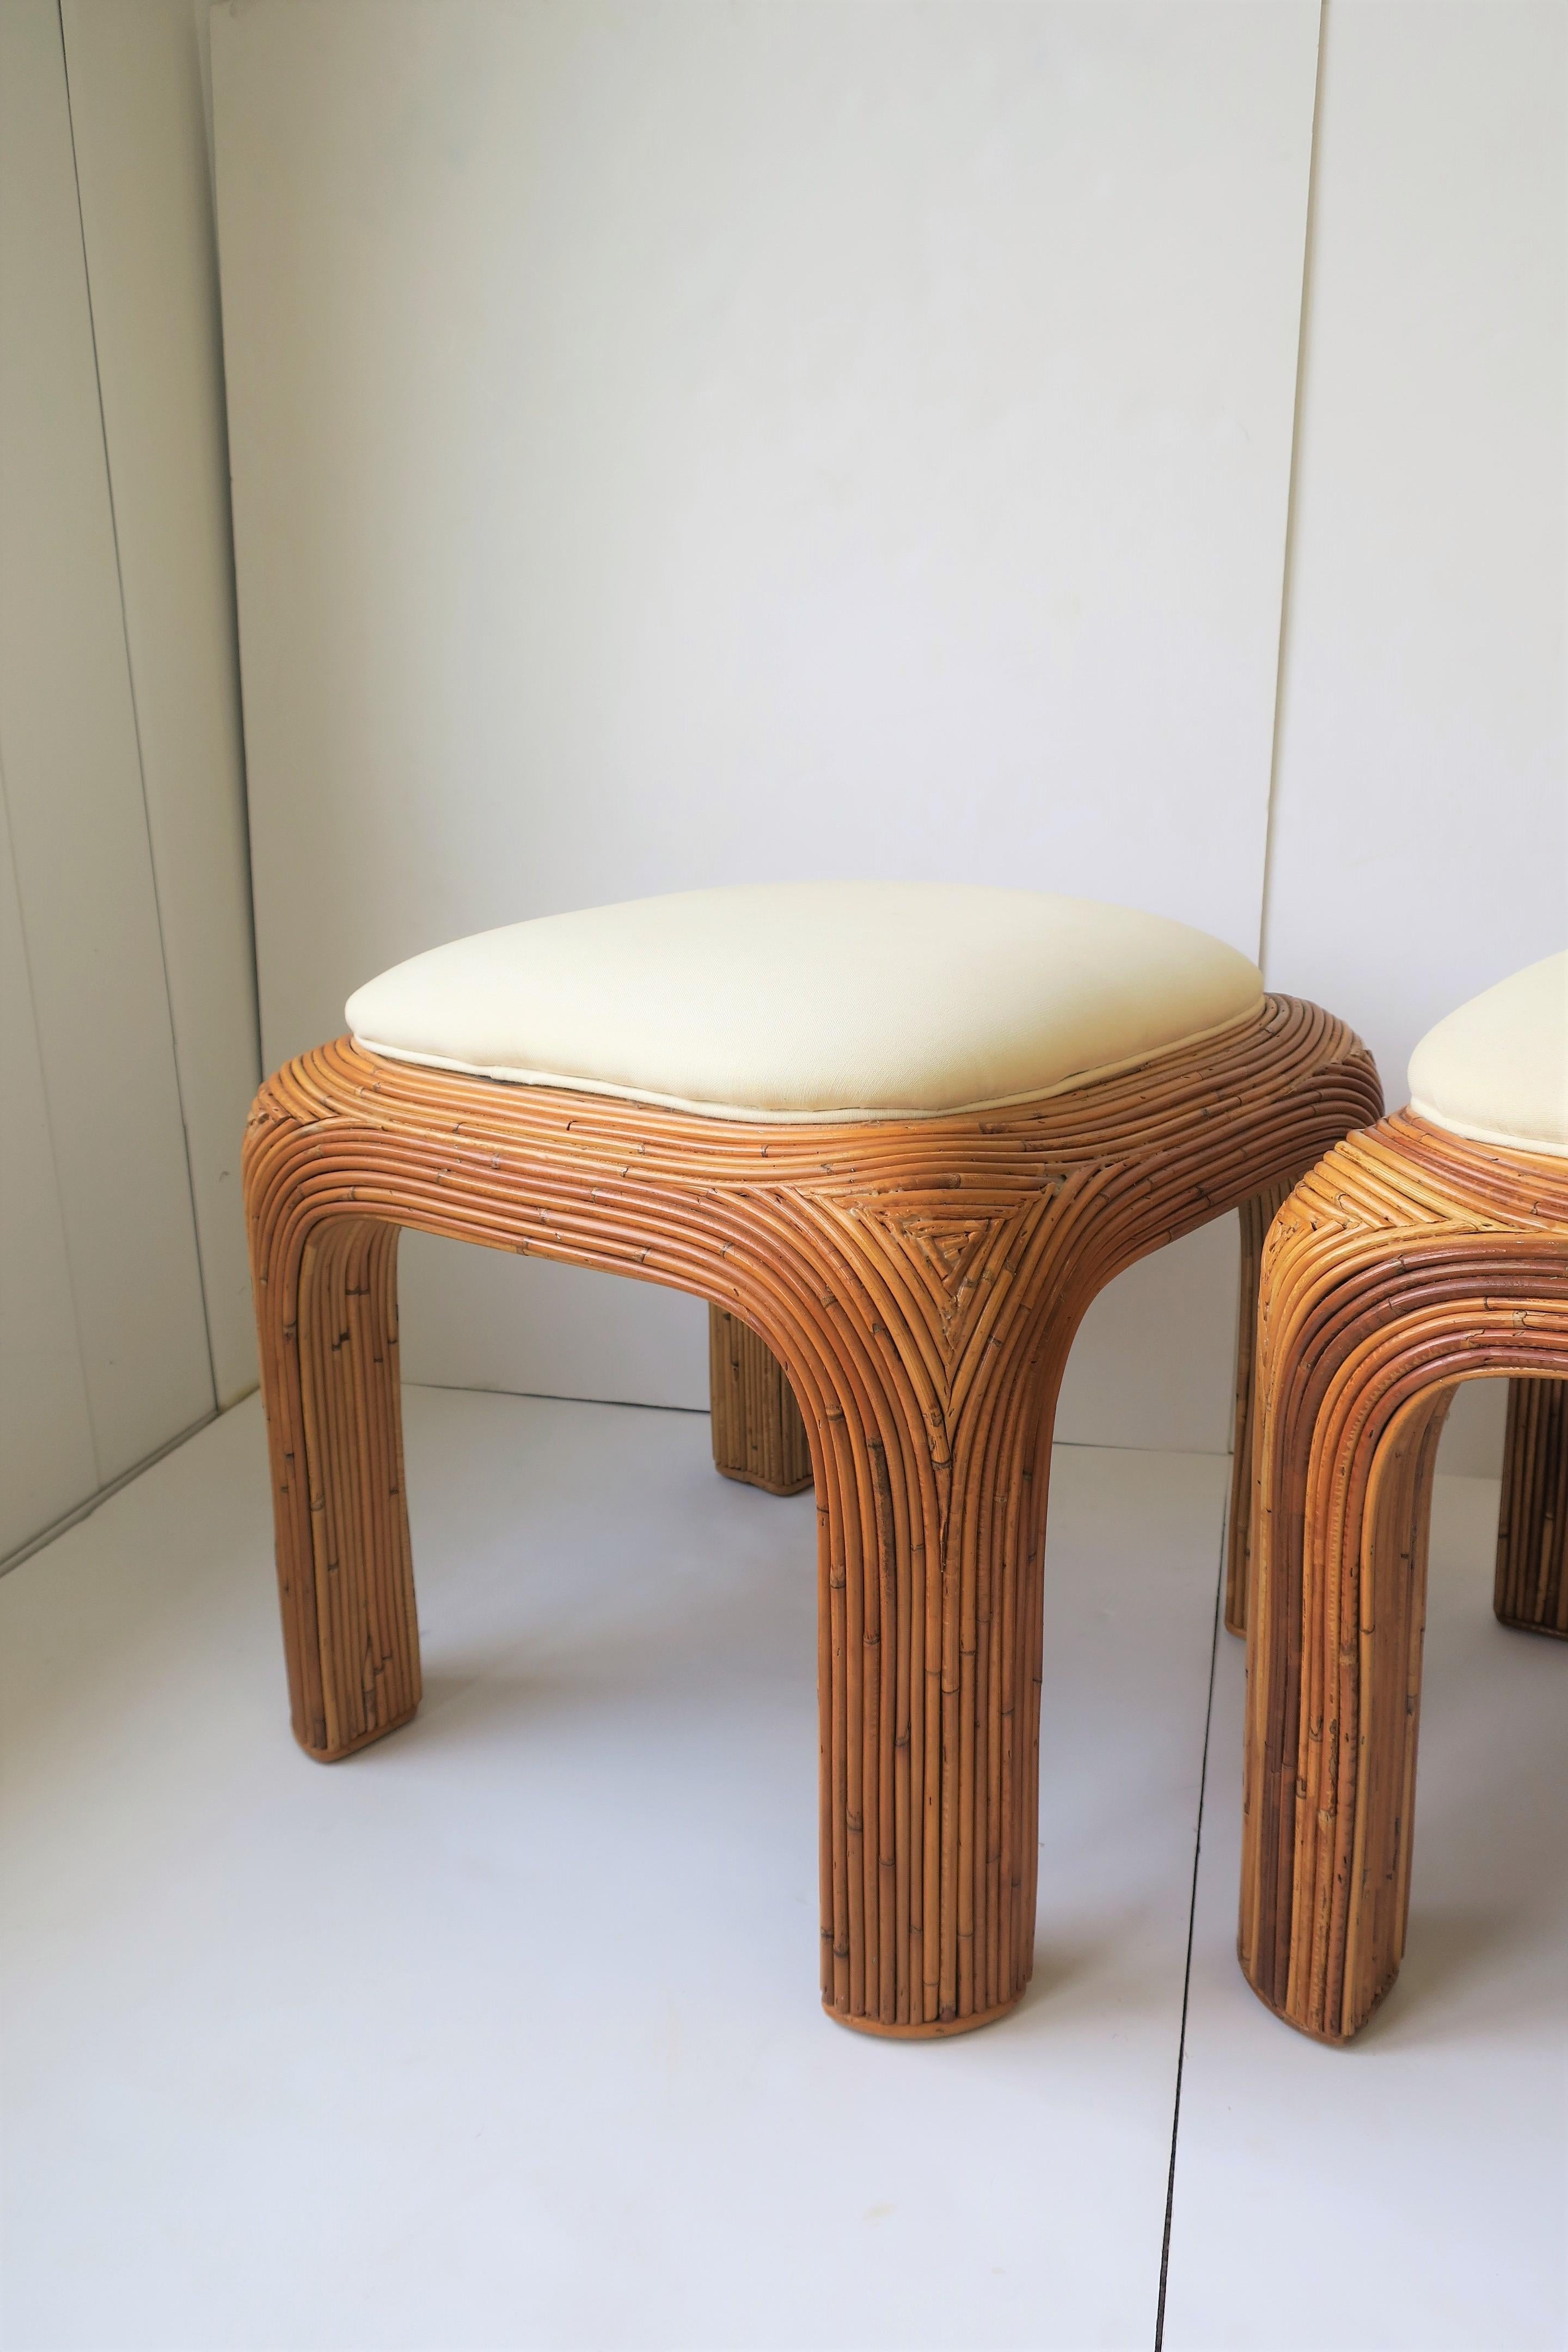 20th Century Pair of Wicker Pencil Reed Upholstered Stools or Benches after Gabriella Crespi